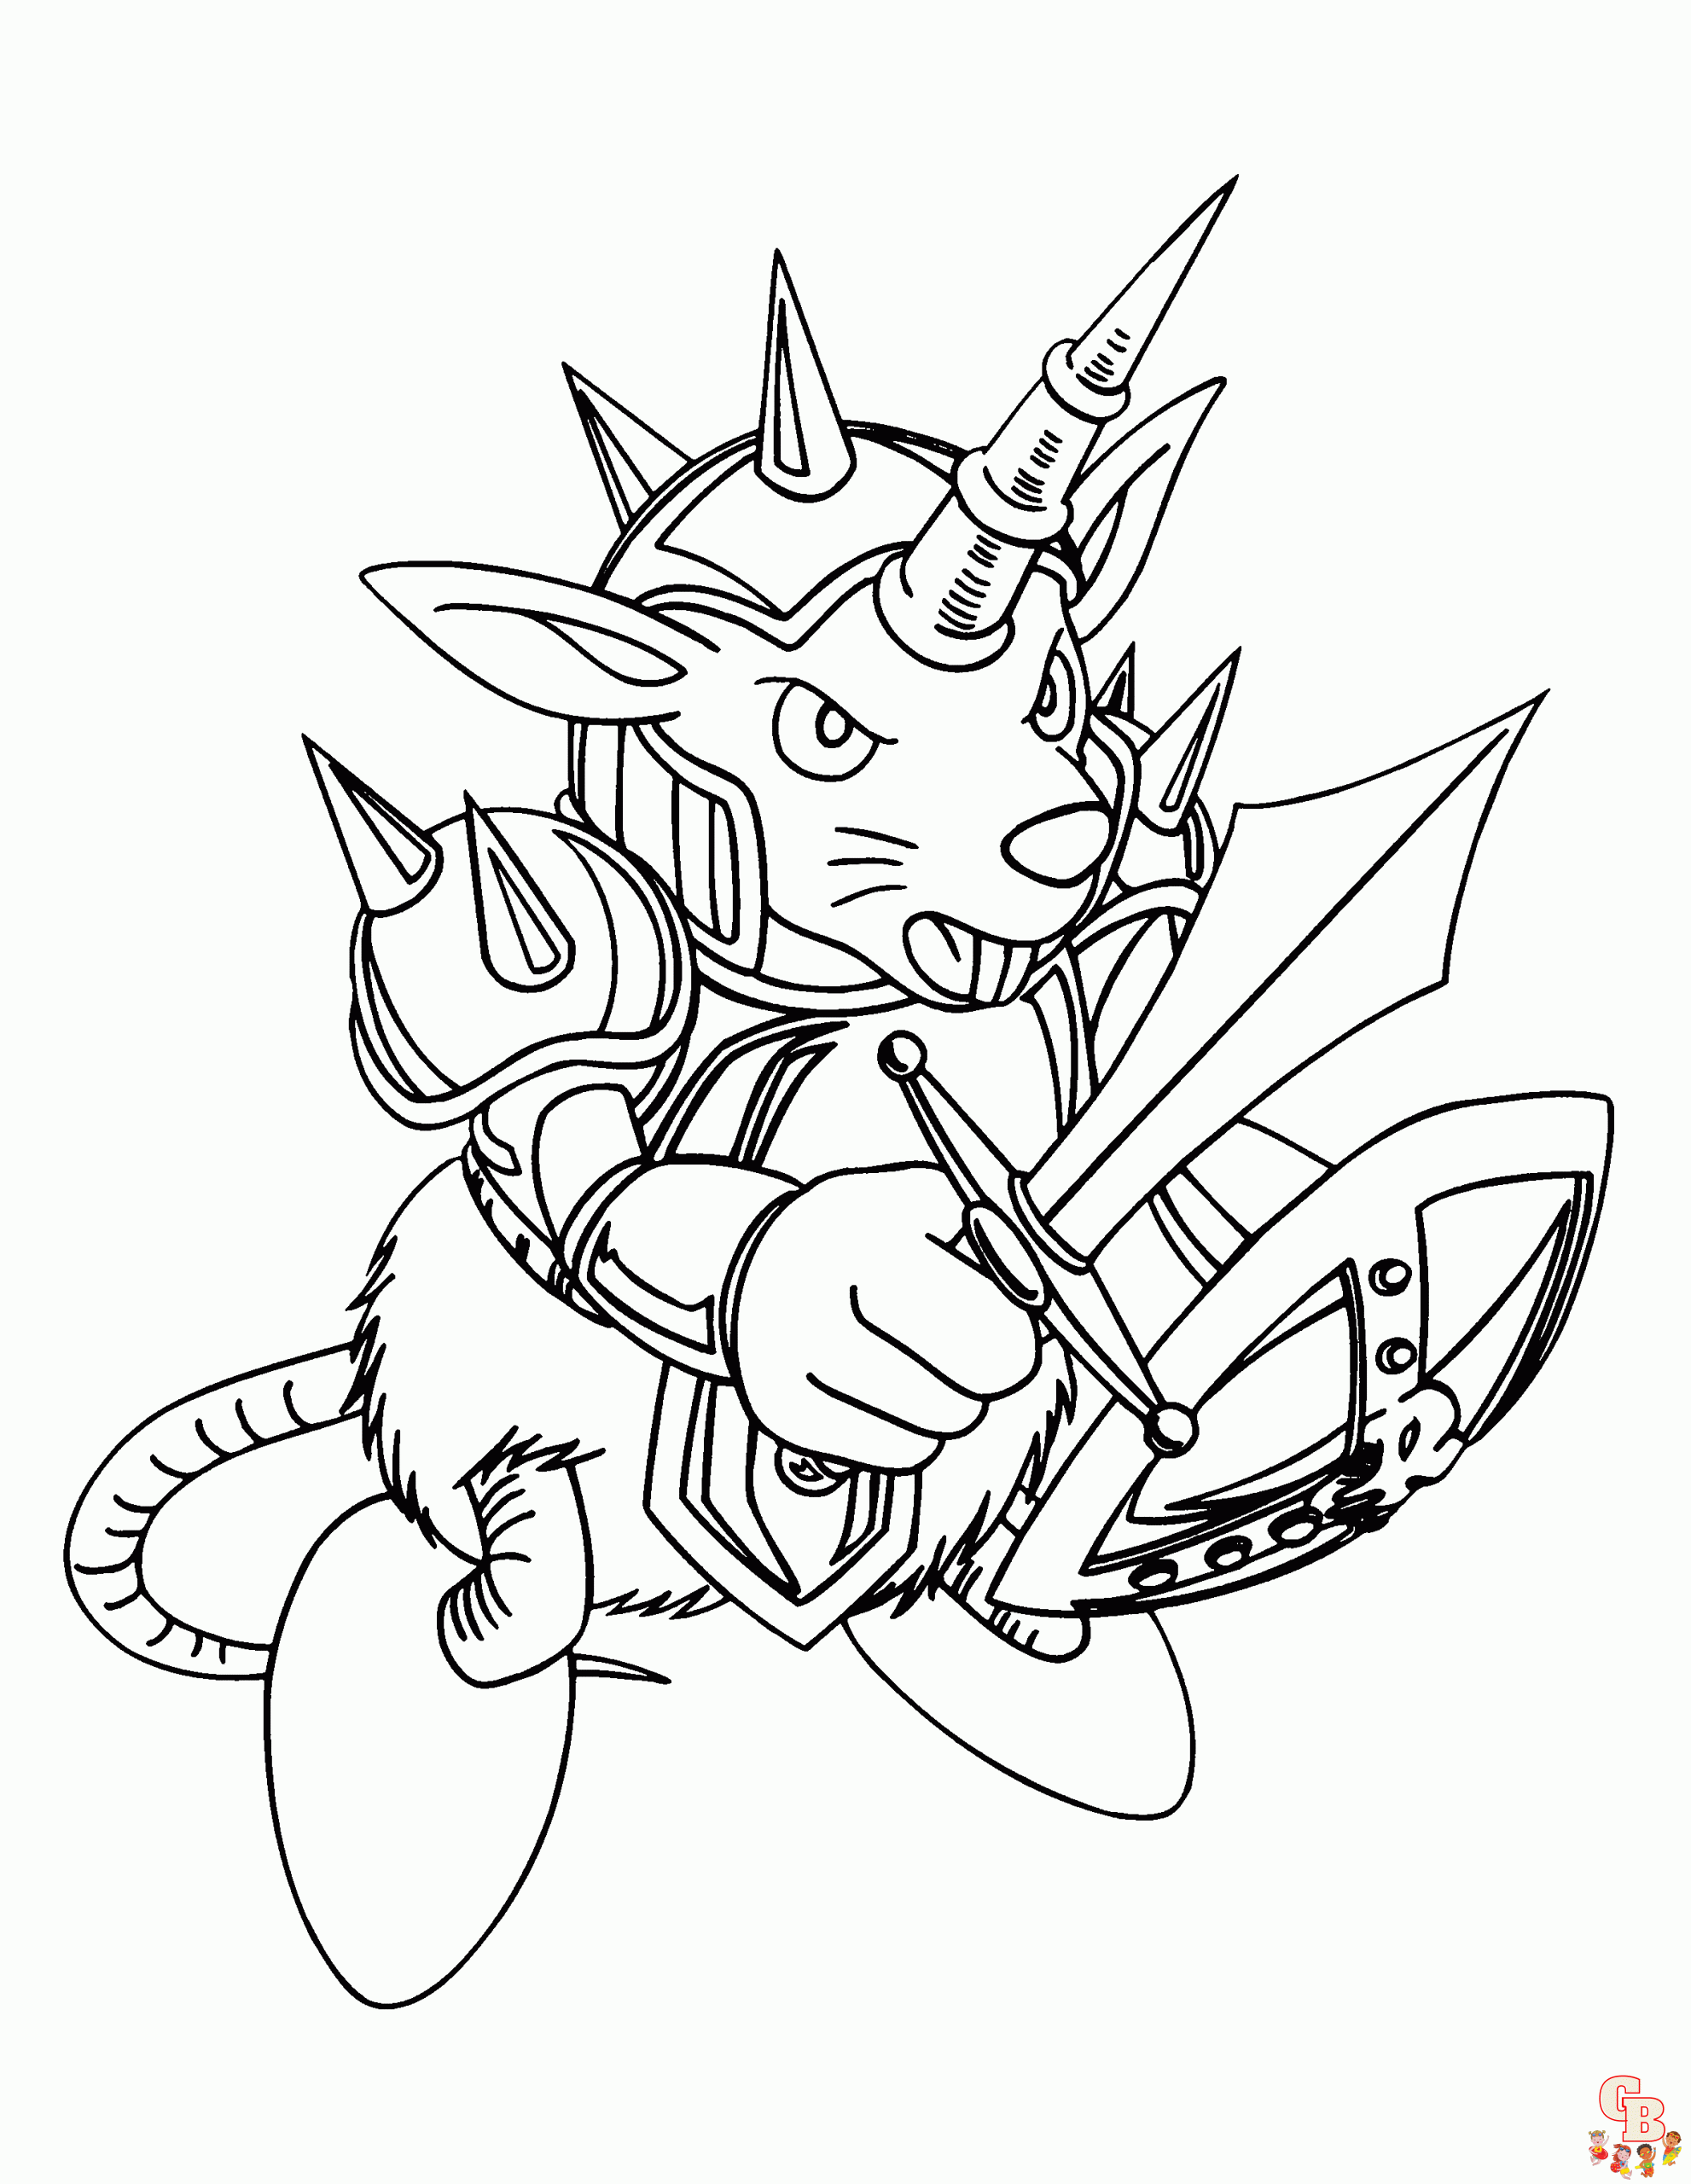 Yugioh Coloring Pages